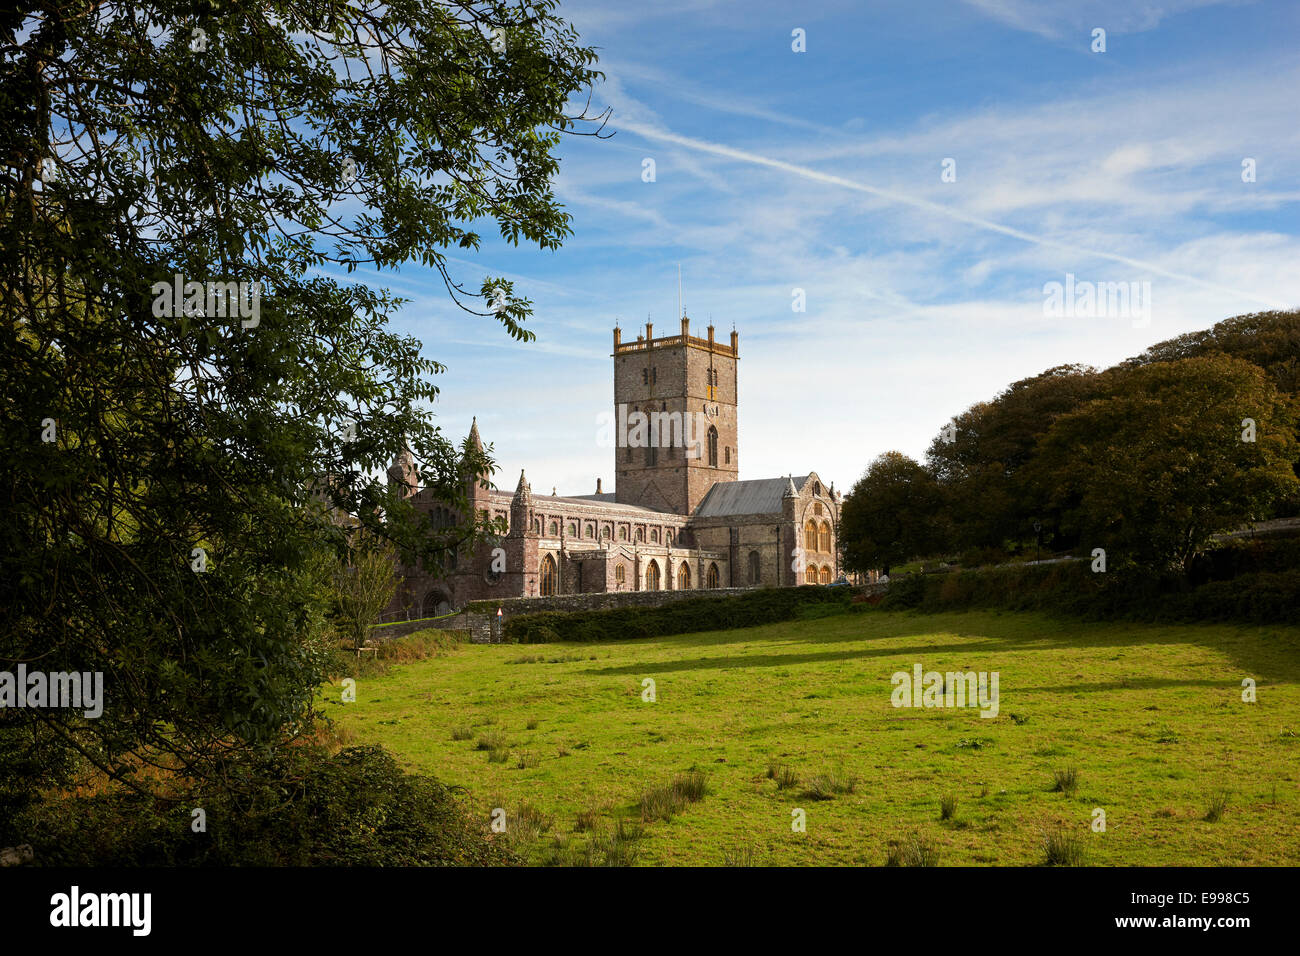 St David's Cathedral, Pembrokeshire National Park, Wales UK Stock Photo